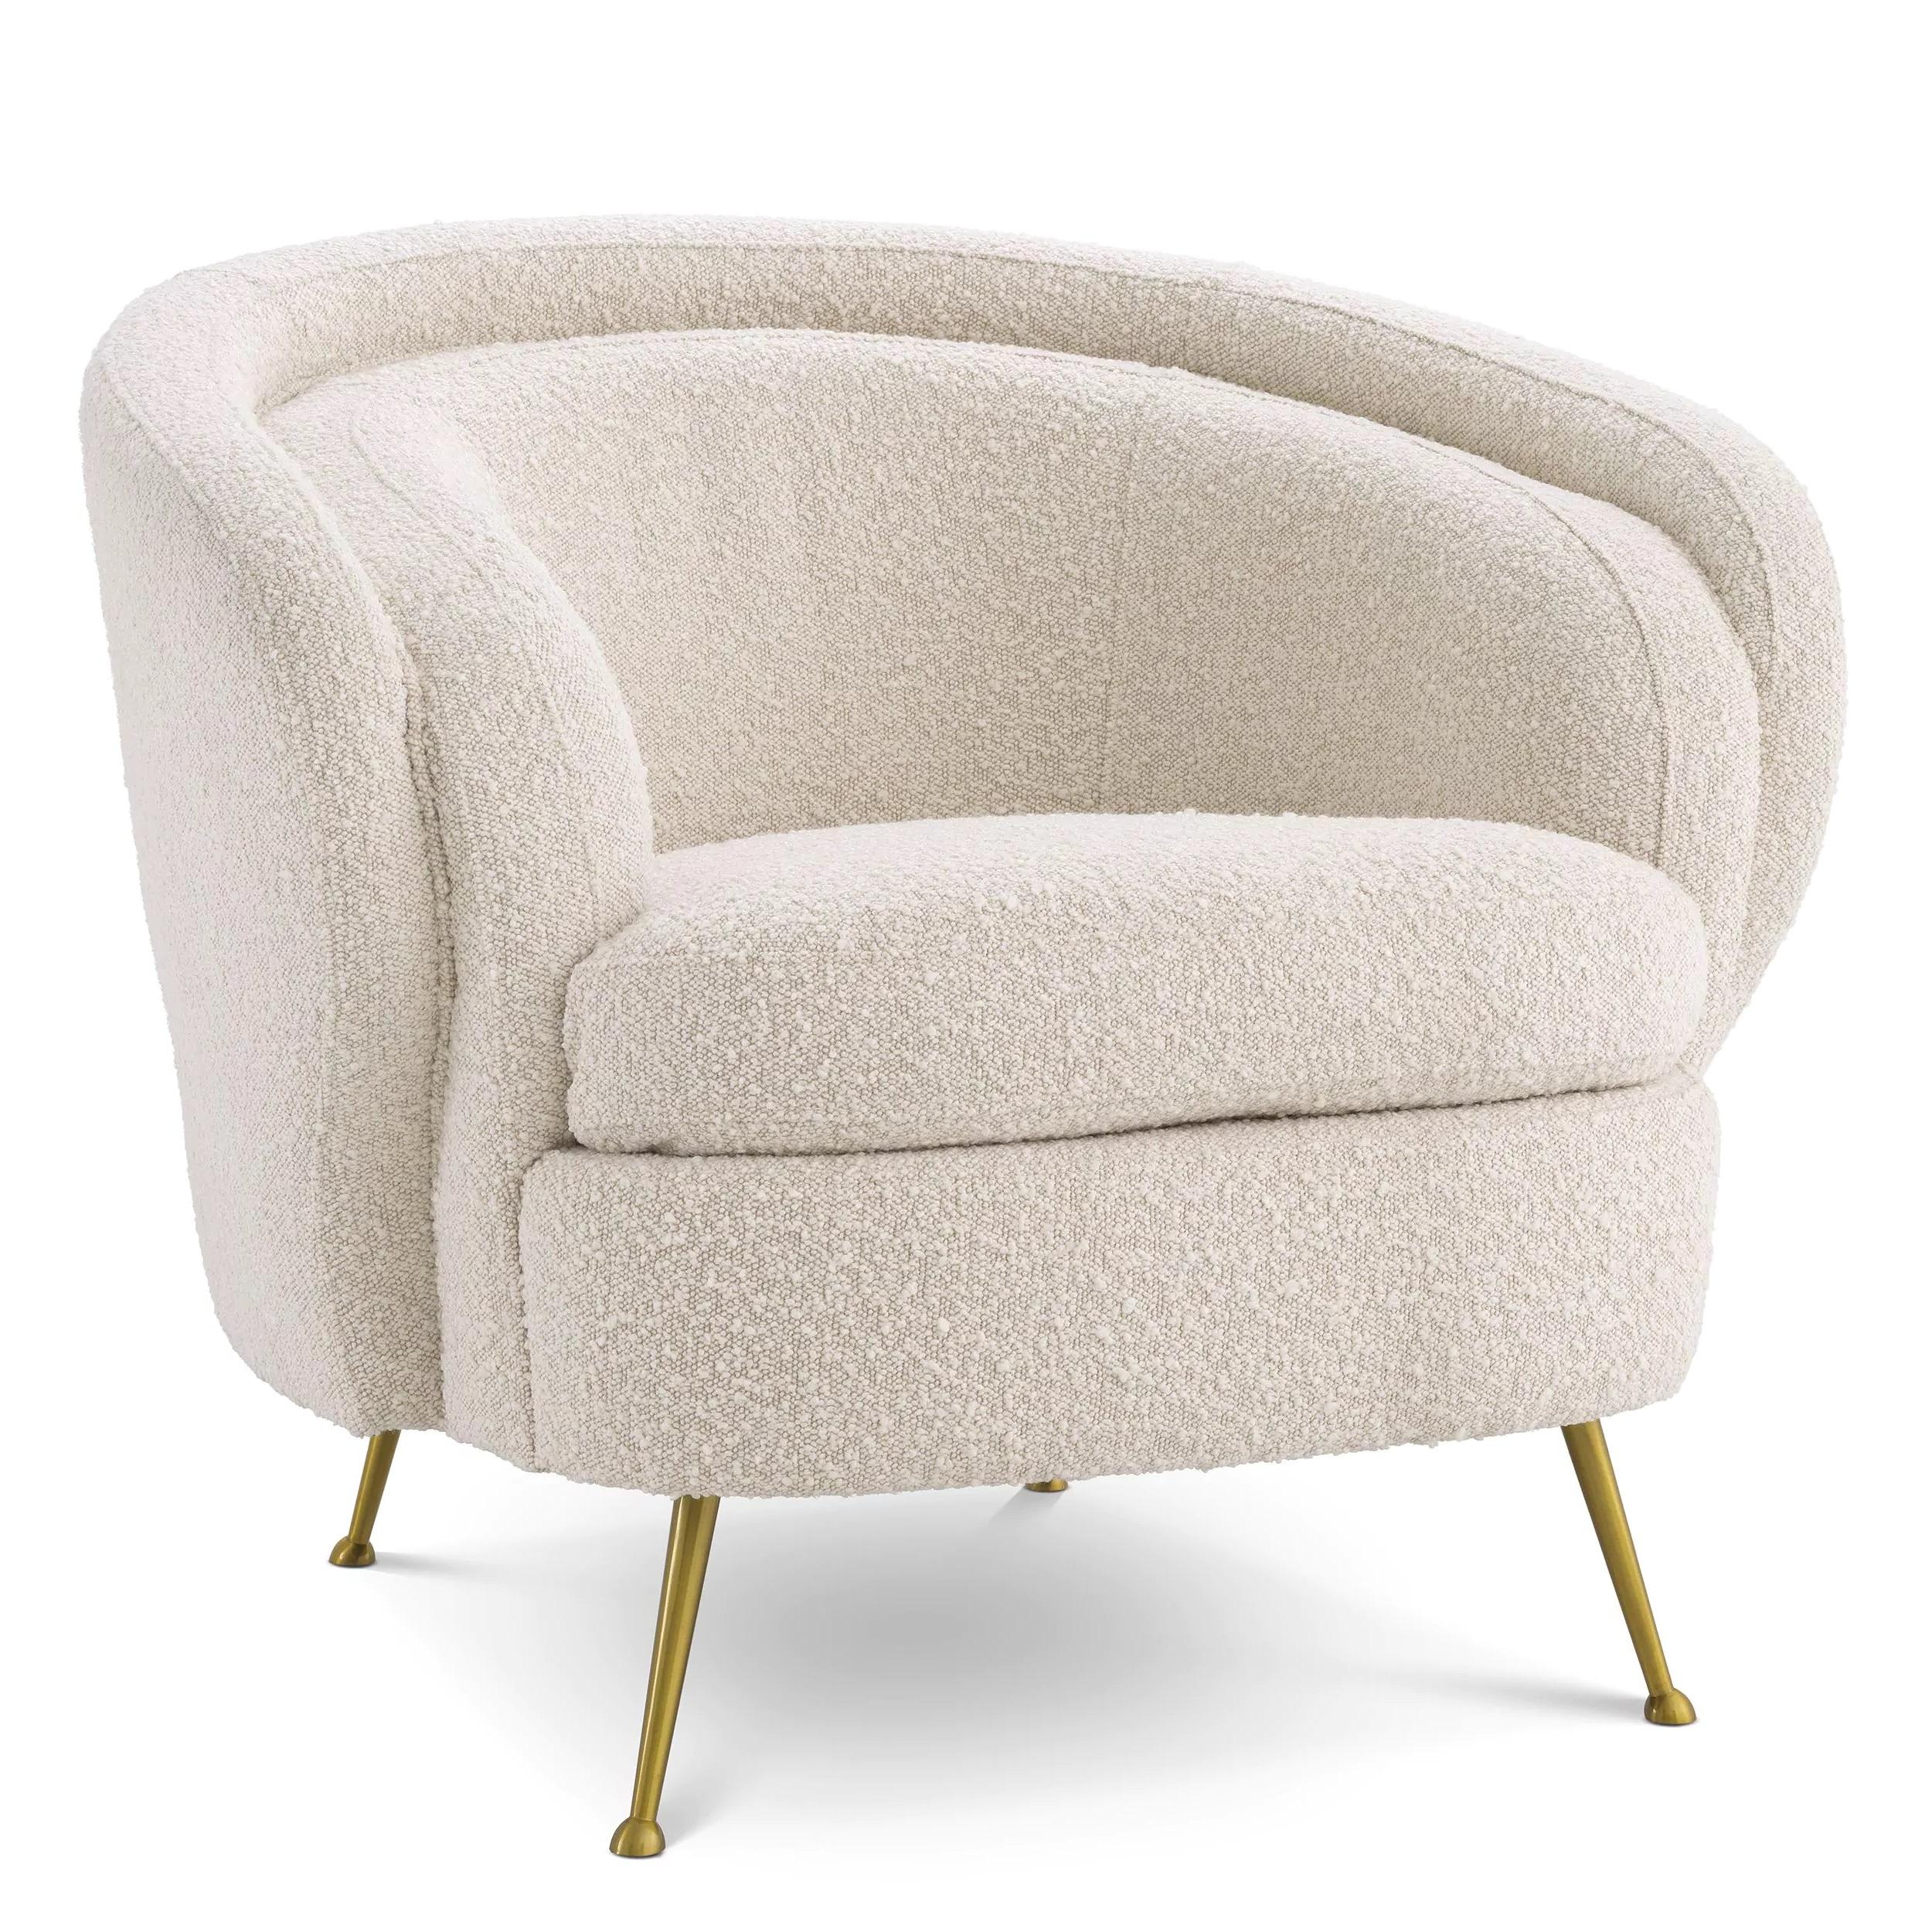 Welcoming and rounded shaped armchair in an Italian 1950s Design Look with beige bouclé fabric with brass finishes feet.